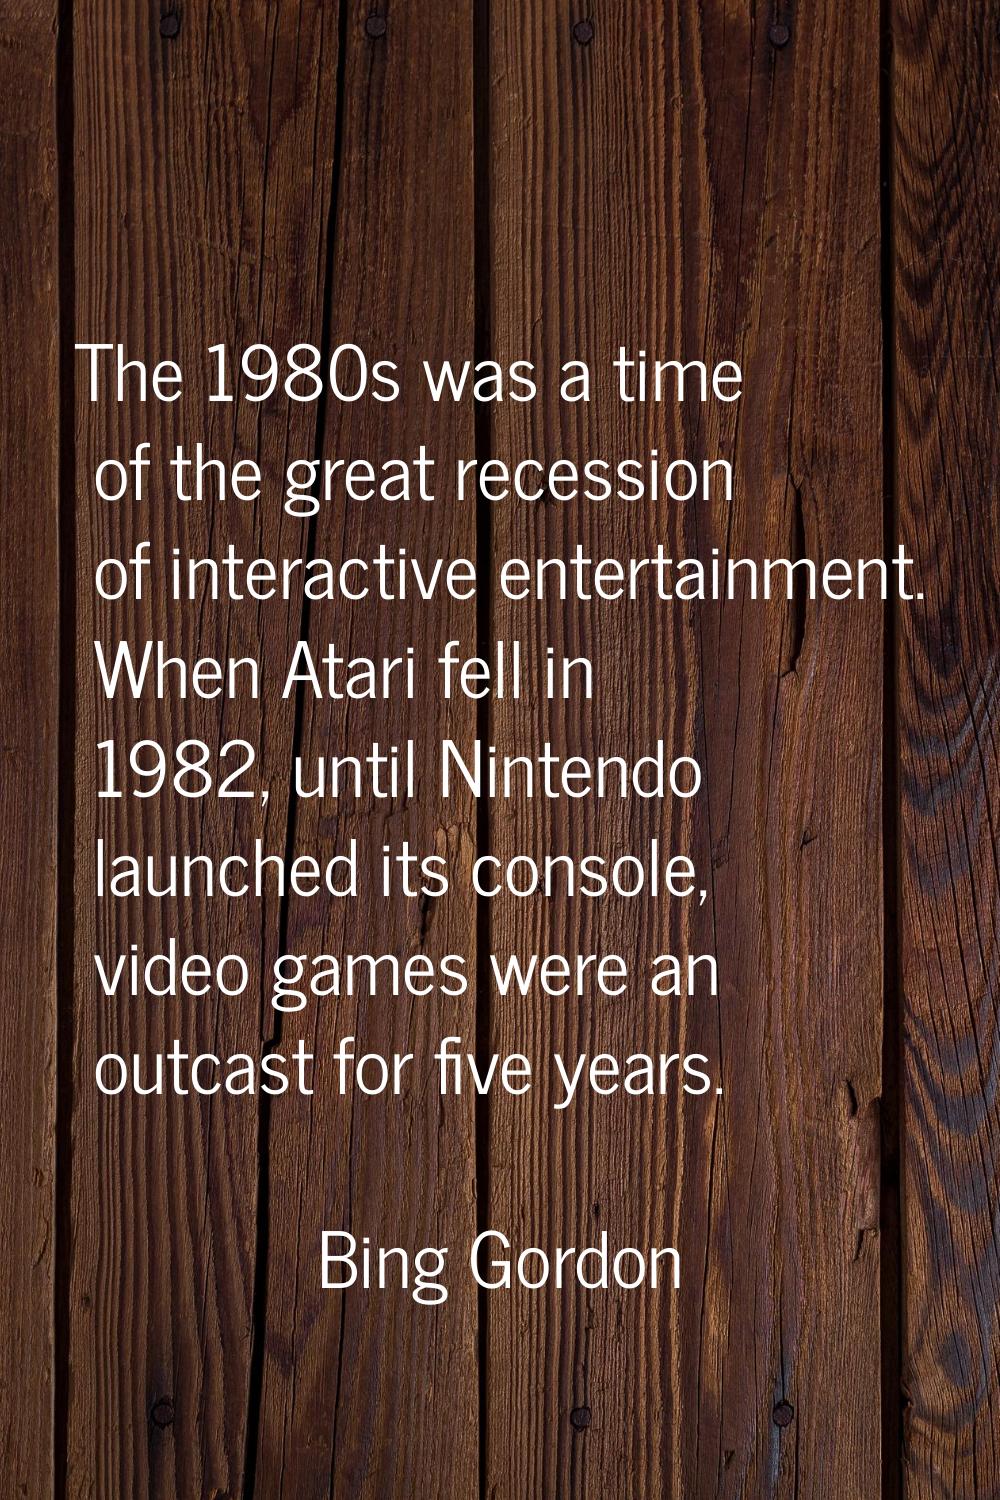 The 1980s was a time of the great recession of interactive entertainment. When Atari fell in 1982, 